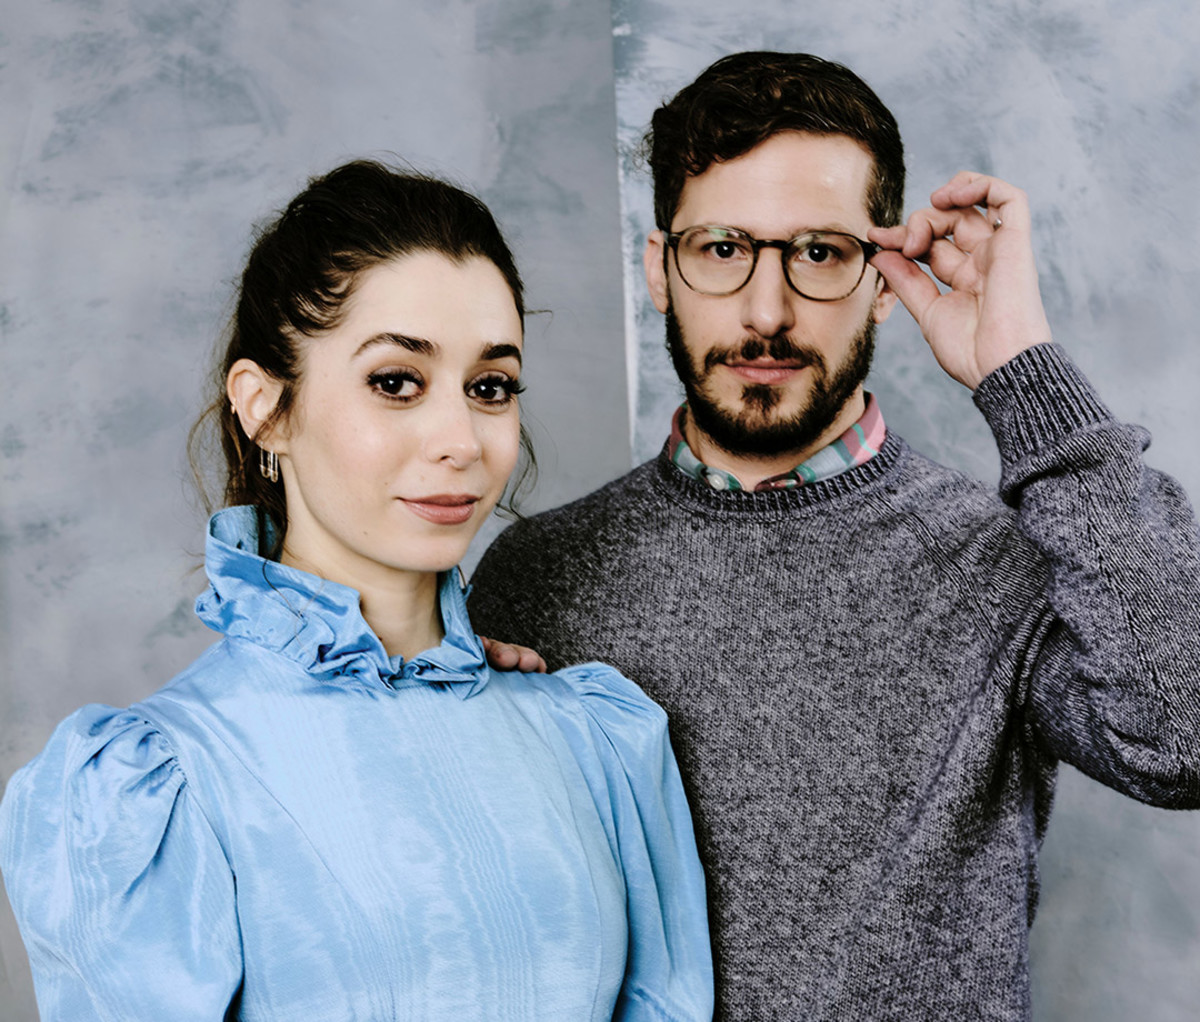 Cristin Milioti and Andy Samberg, the stars of "Palm Springs," at the Sundance Film Festival in 2020